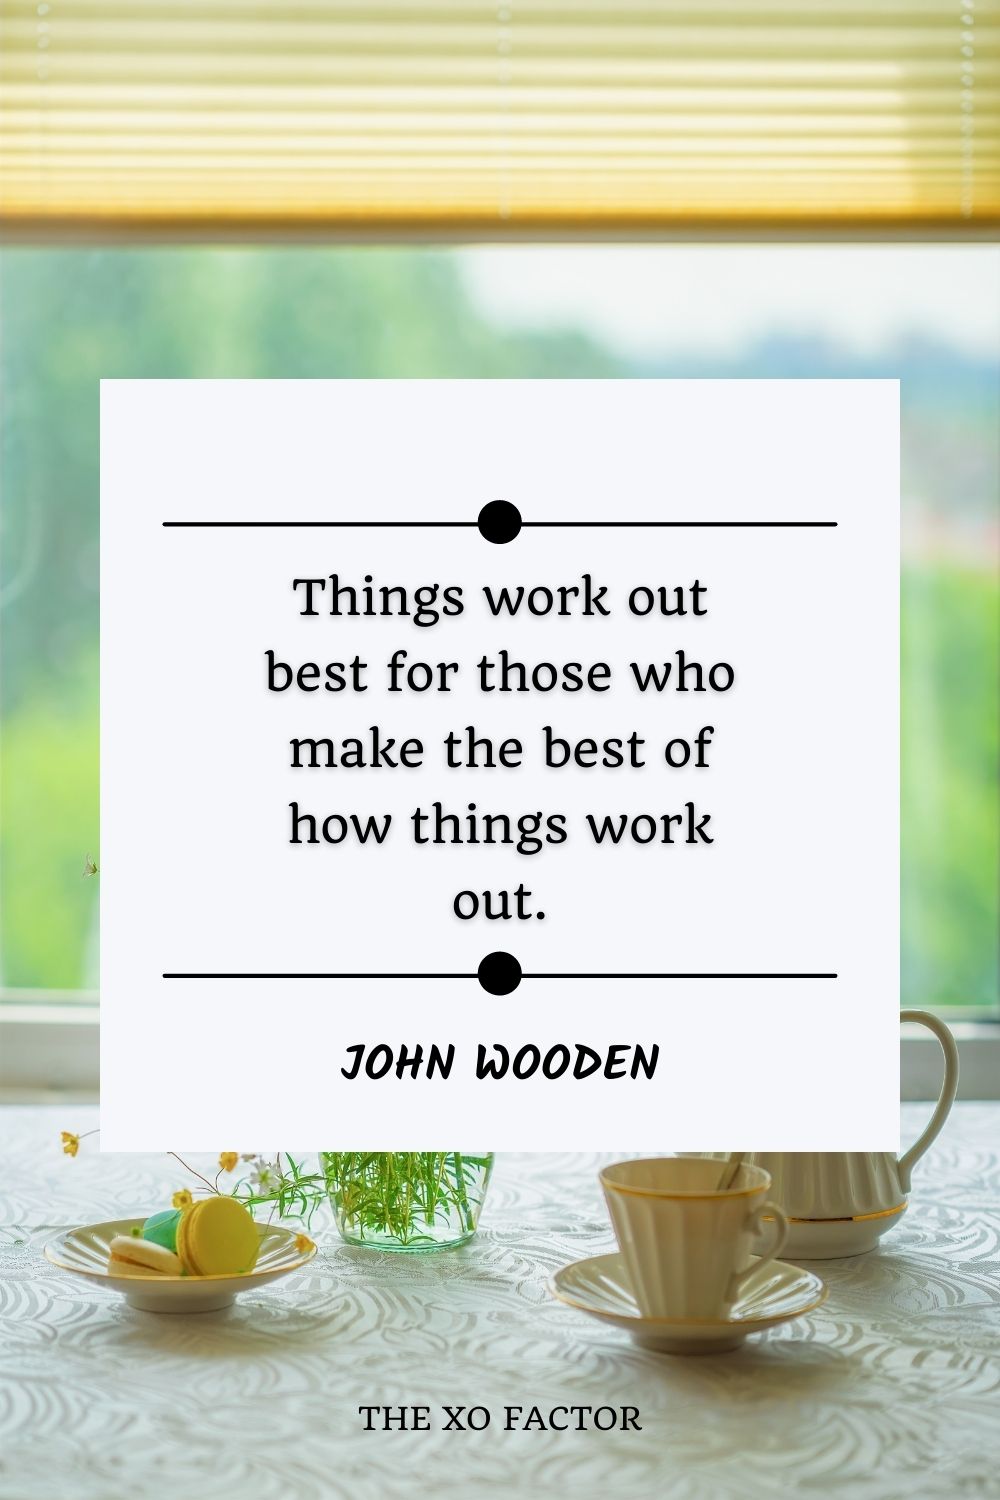 Things work out best for those who make the best of how things work out.” – John Wooden